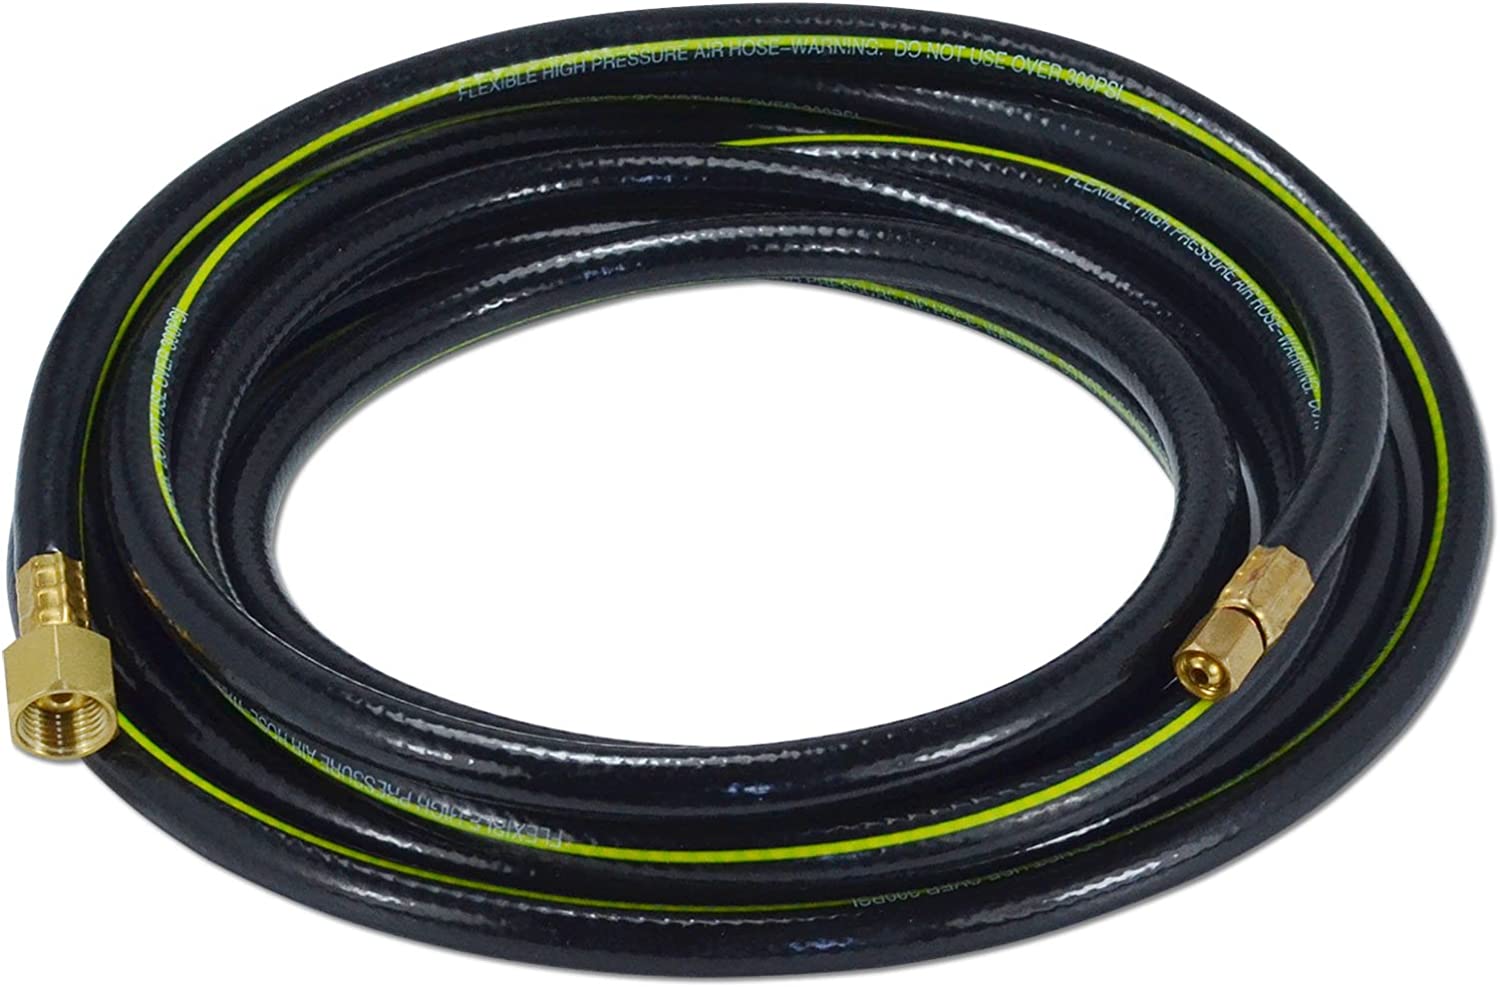 Power Cable Hose for SG-55 Plasma Cutter Torch 12" Feet Wire 6mm2 Connector 3/8-24 Inside M16x1.5 (SG-55 12")